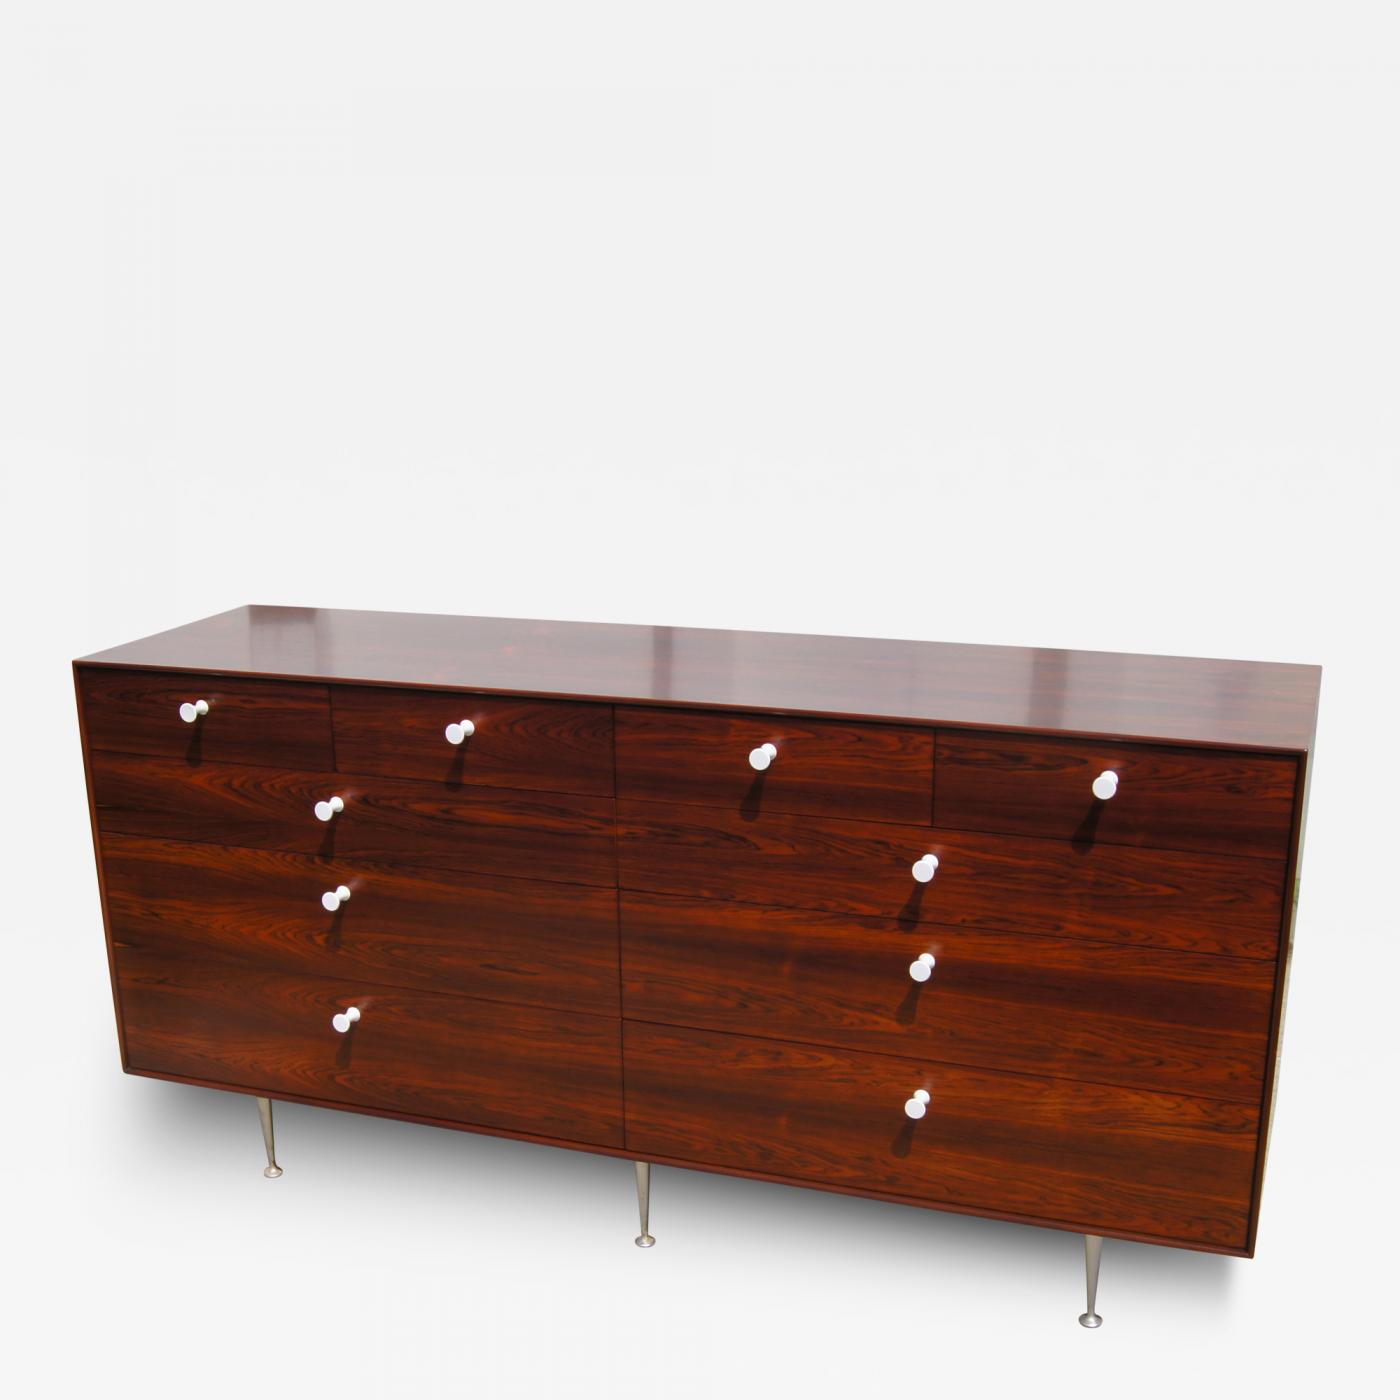 George Nelson Early Thin Edge Ten Drawer Rosewood Dresser